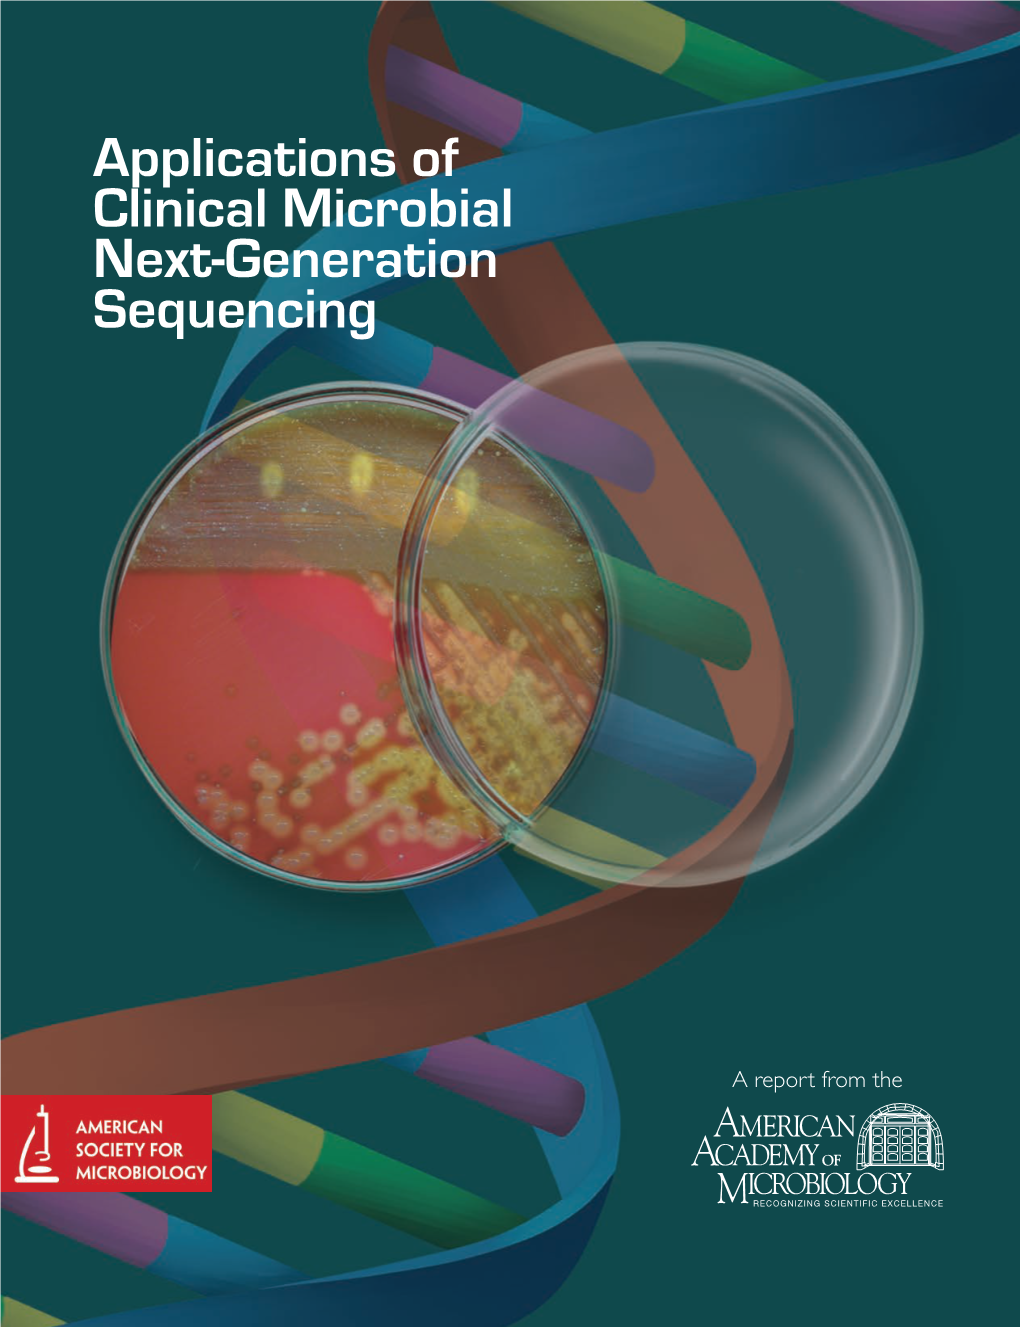 Applications of Clinical Microbial Next-Generation Sequencing